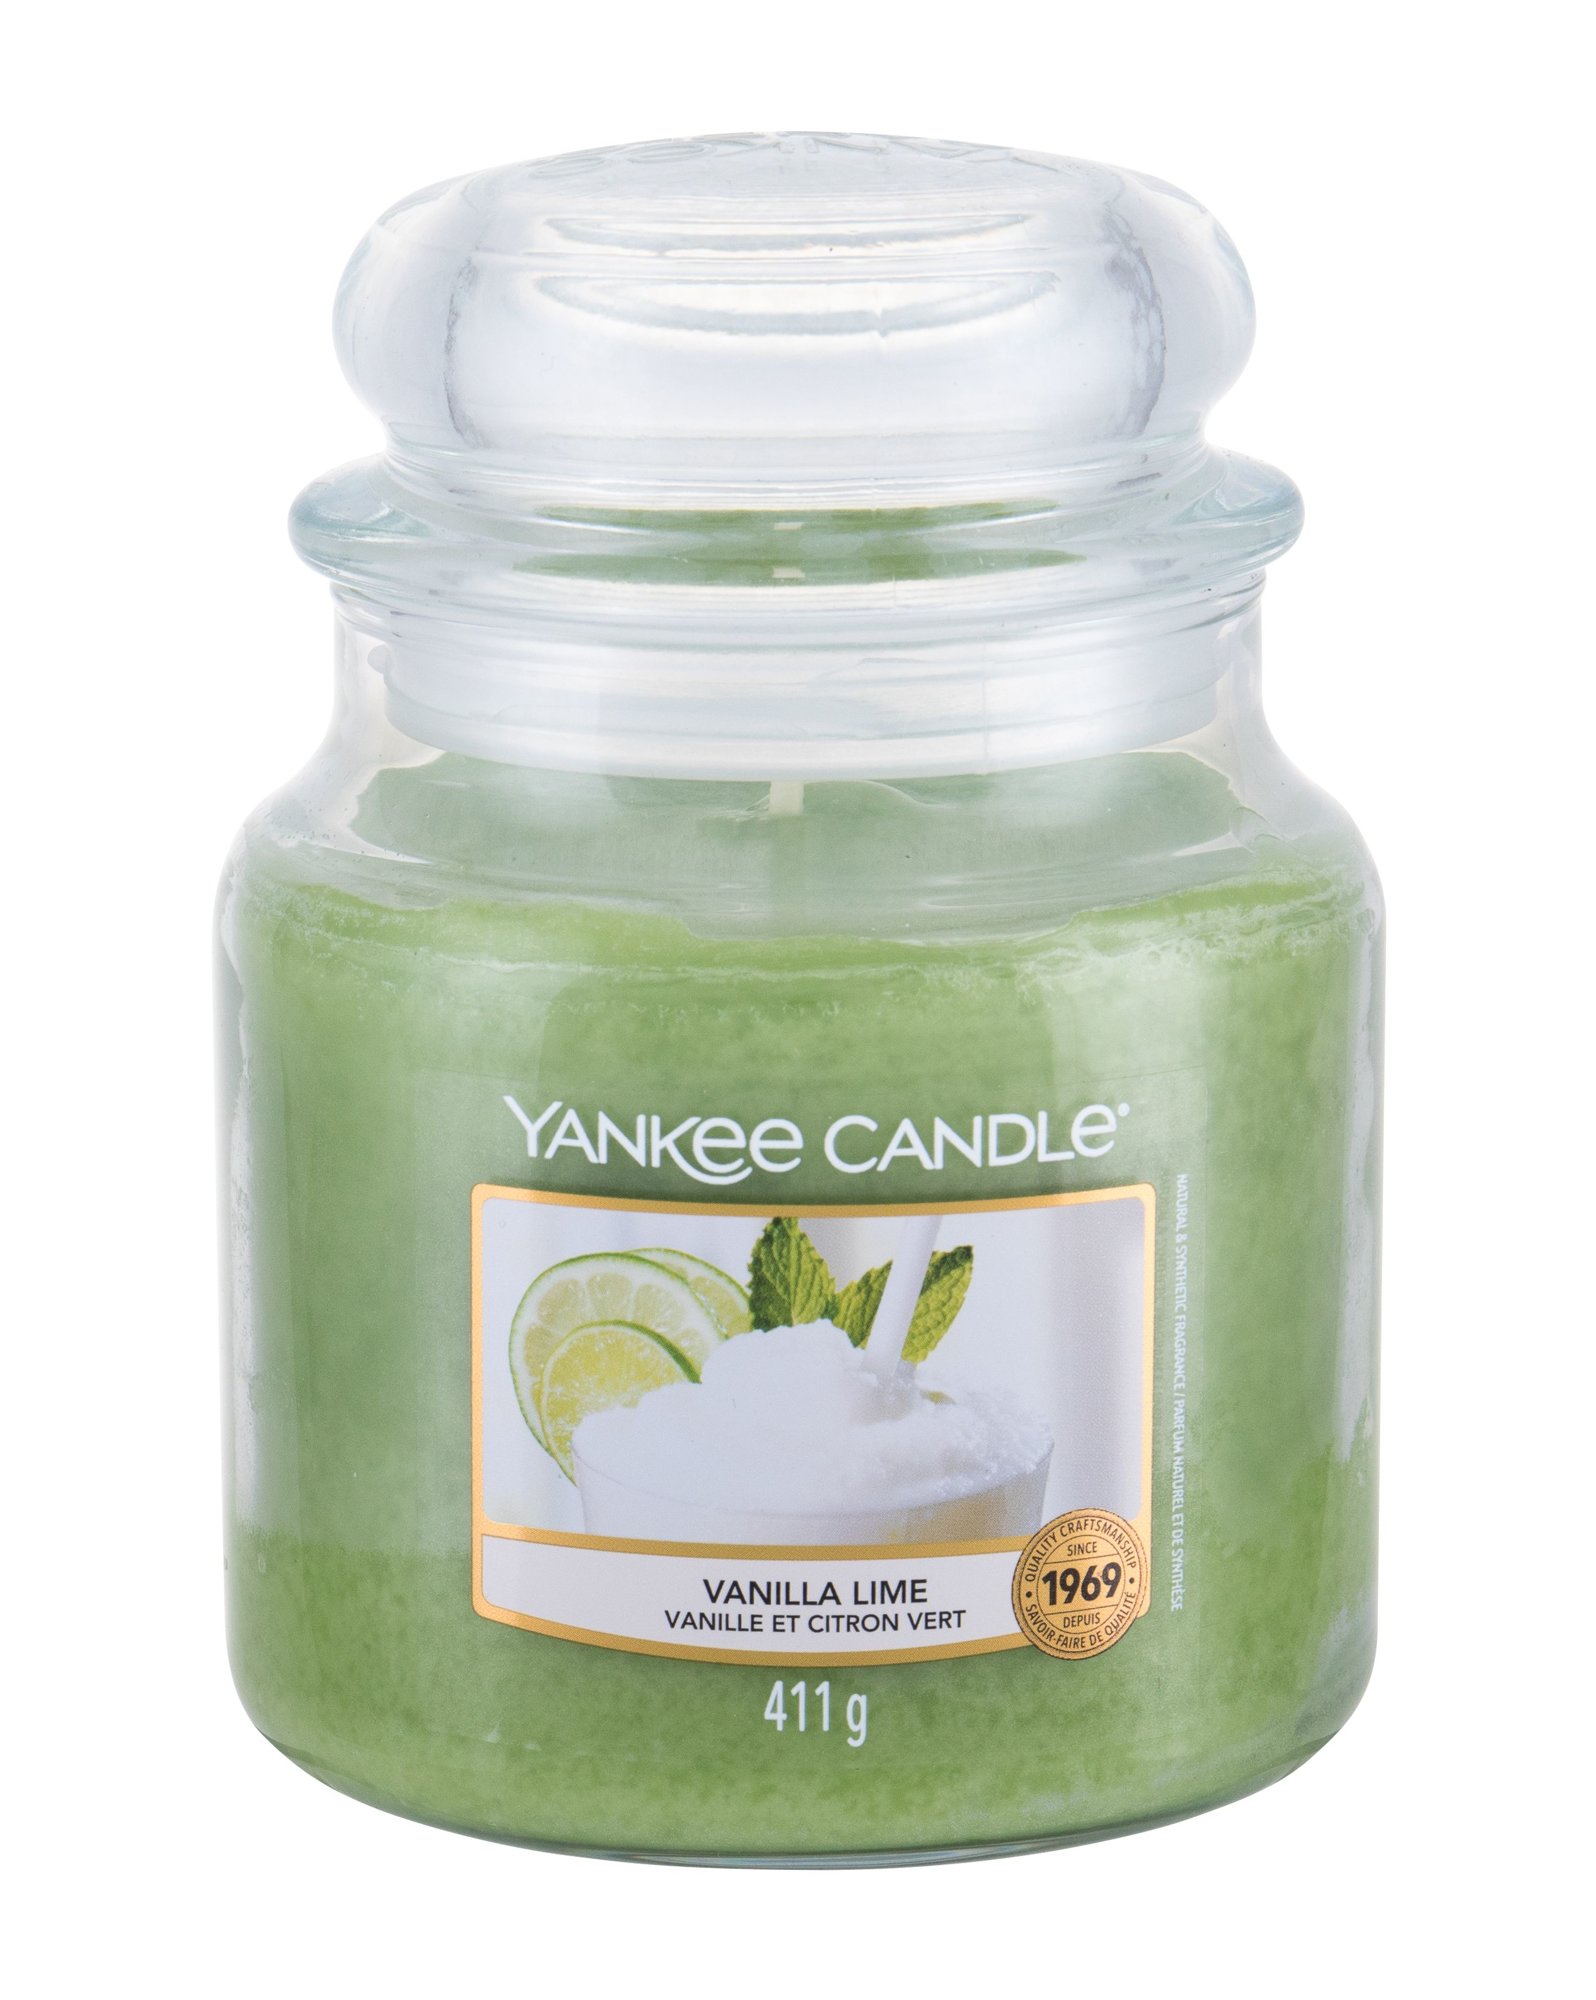 Yankee Candle Vanilla Lime 411g Kvepalai Unisex Scented Candle